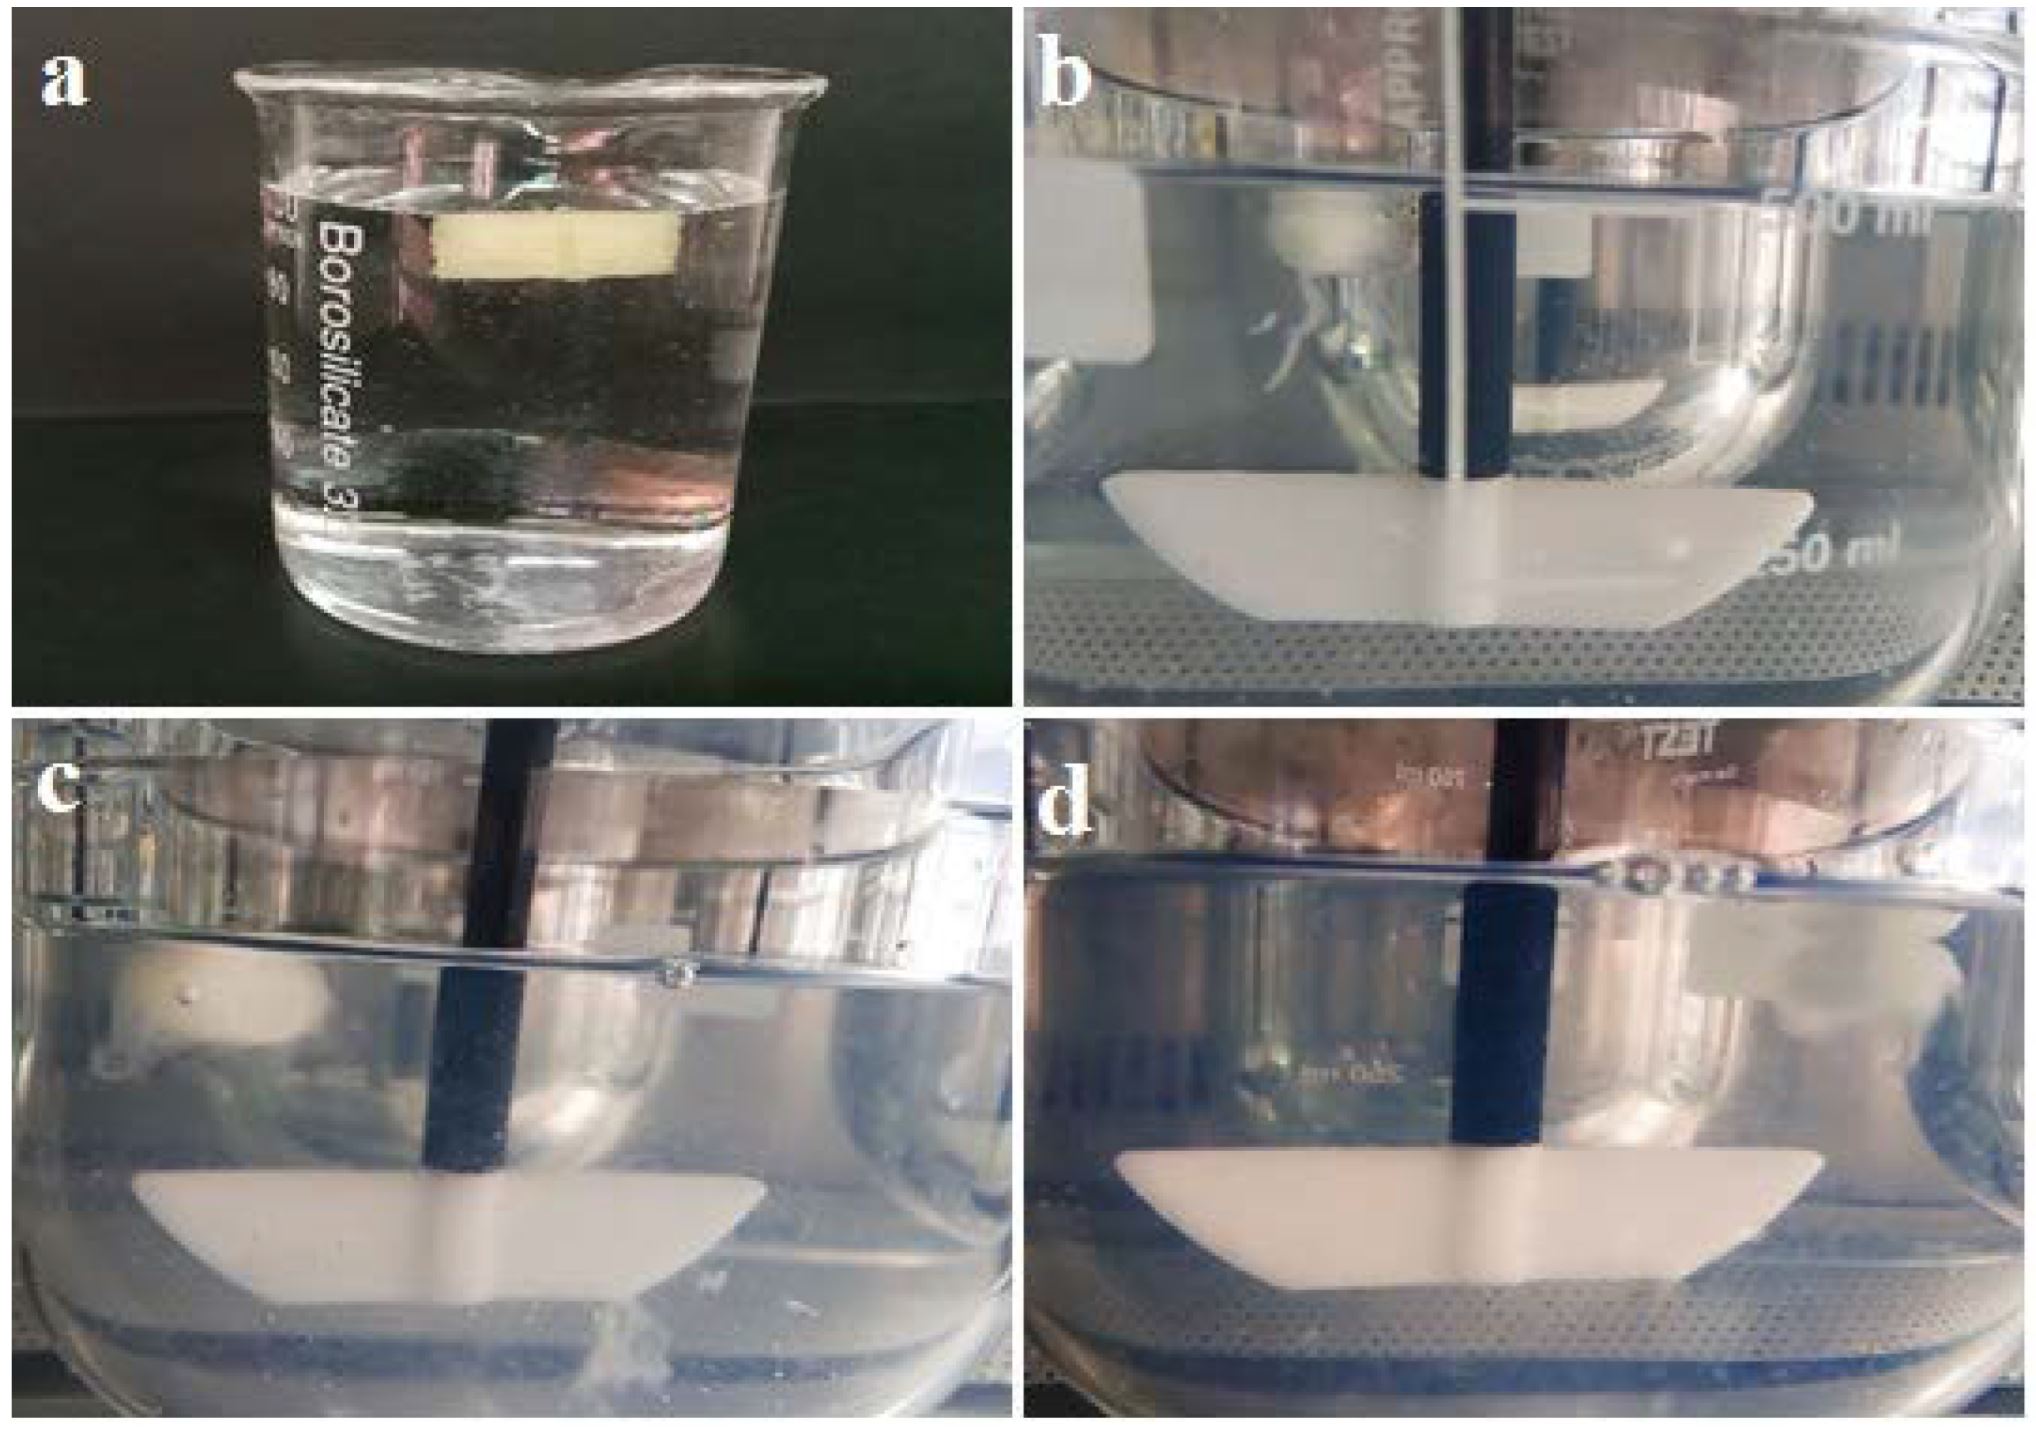 Fabrication of a Controlled-Release Core-Shell Floating Tablet of Ketamine Hydrochloride Using a 3D Printing Technique for Management of Refractory Depressions and Chronic Pain